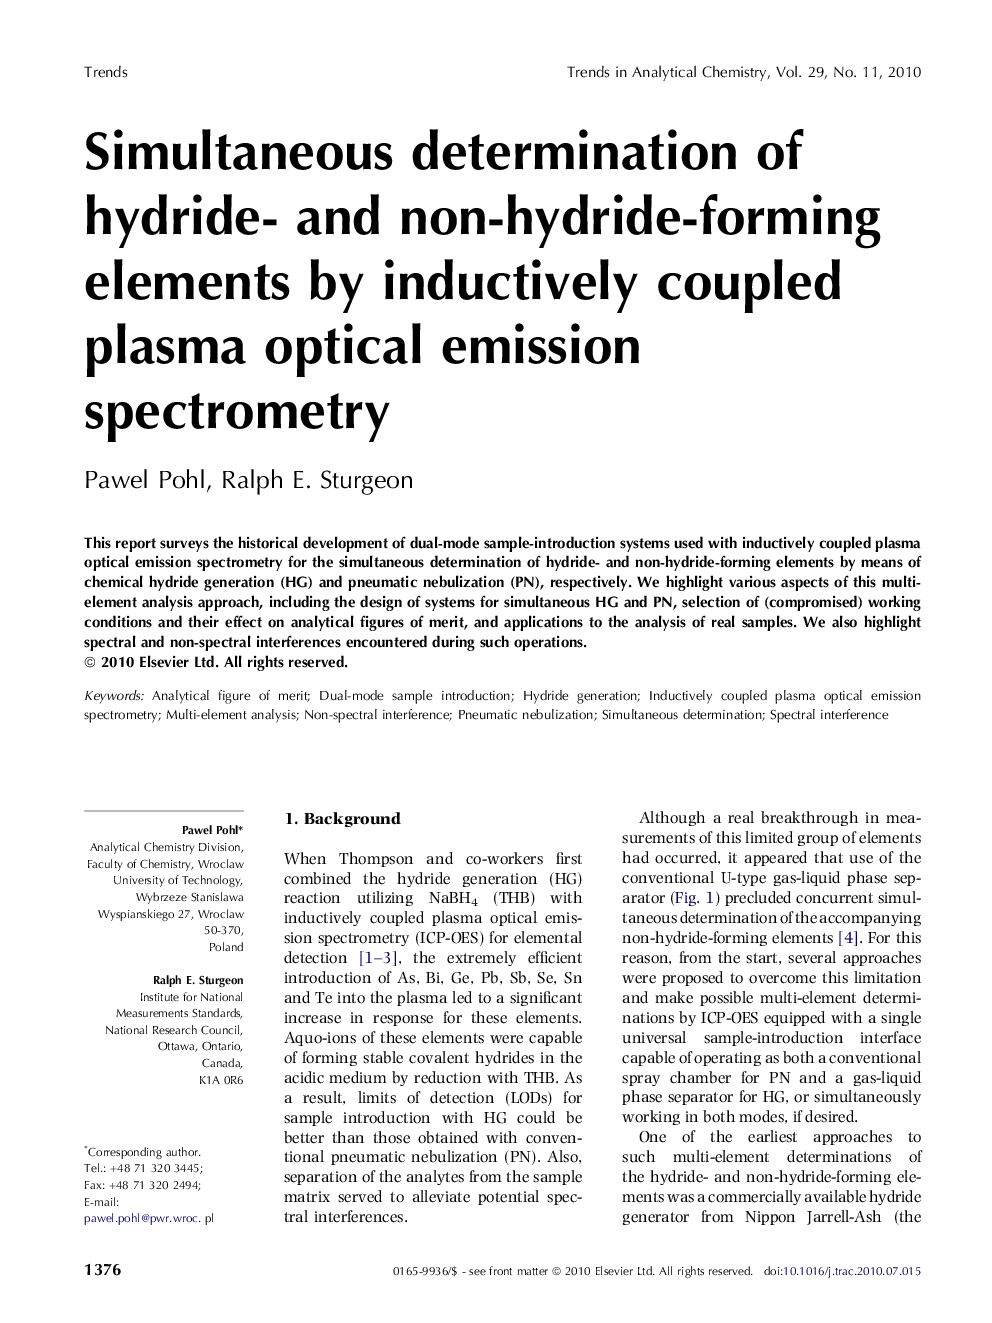 Simultaneous determination of hydride- and non-hydride-forming elements by inductively coupled plasma optical emission spectrometry